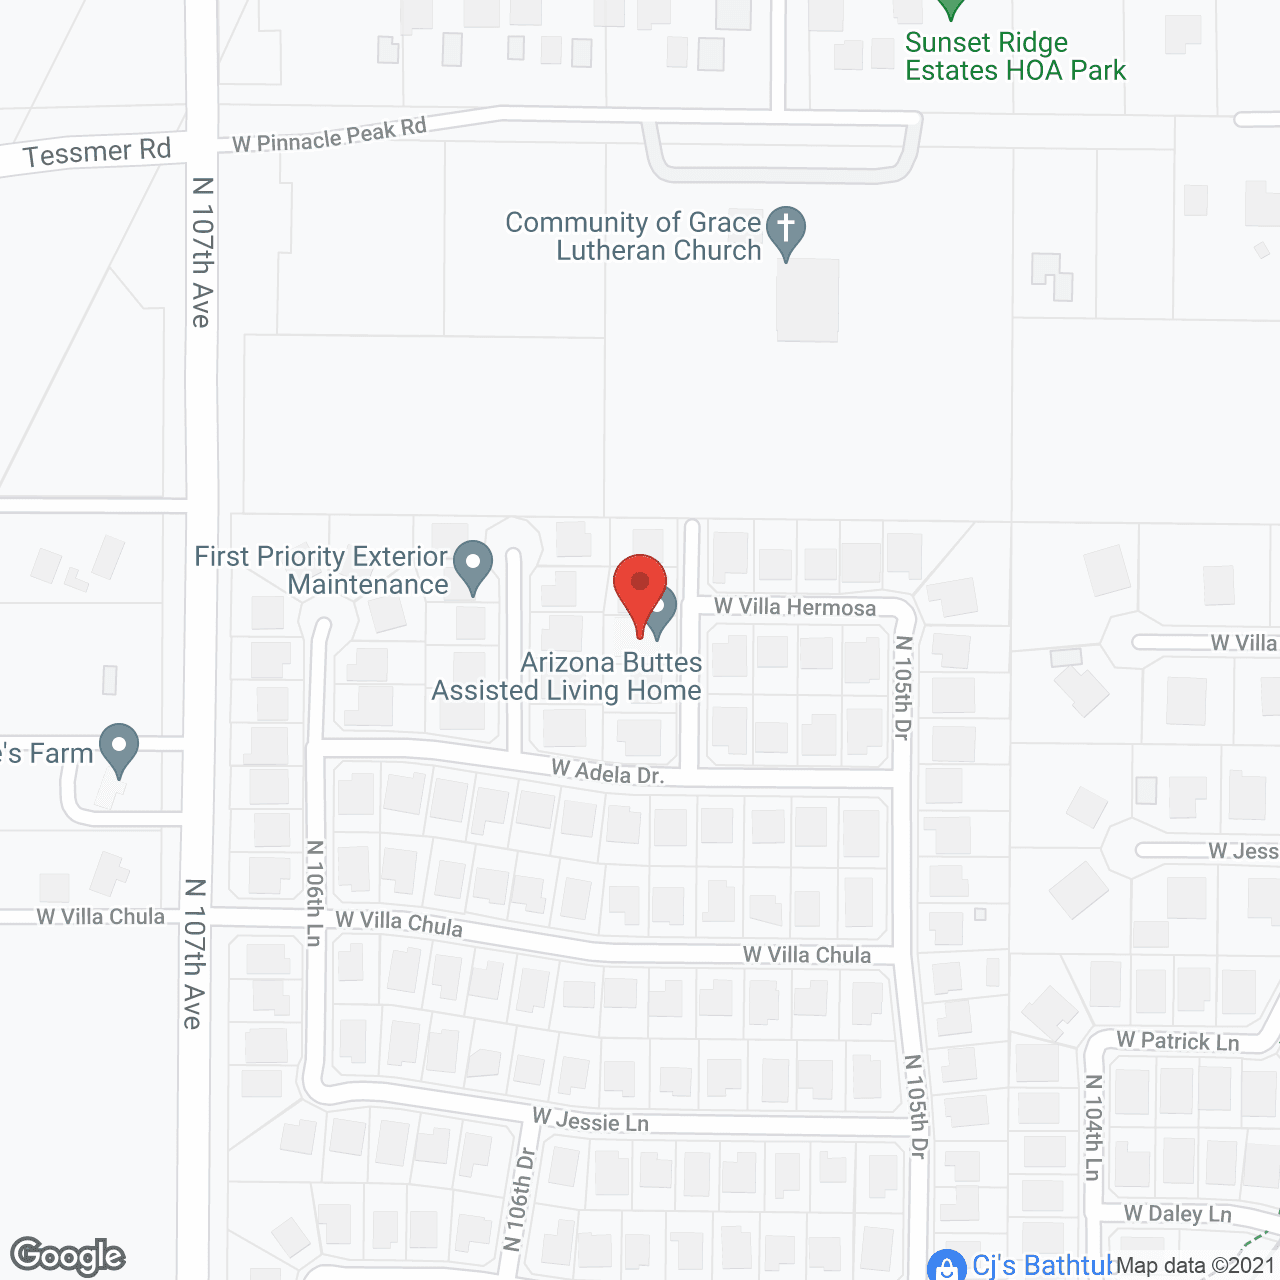 Arizona Buttes Assisted Living Home in google map